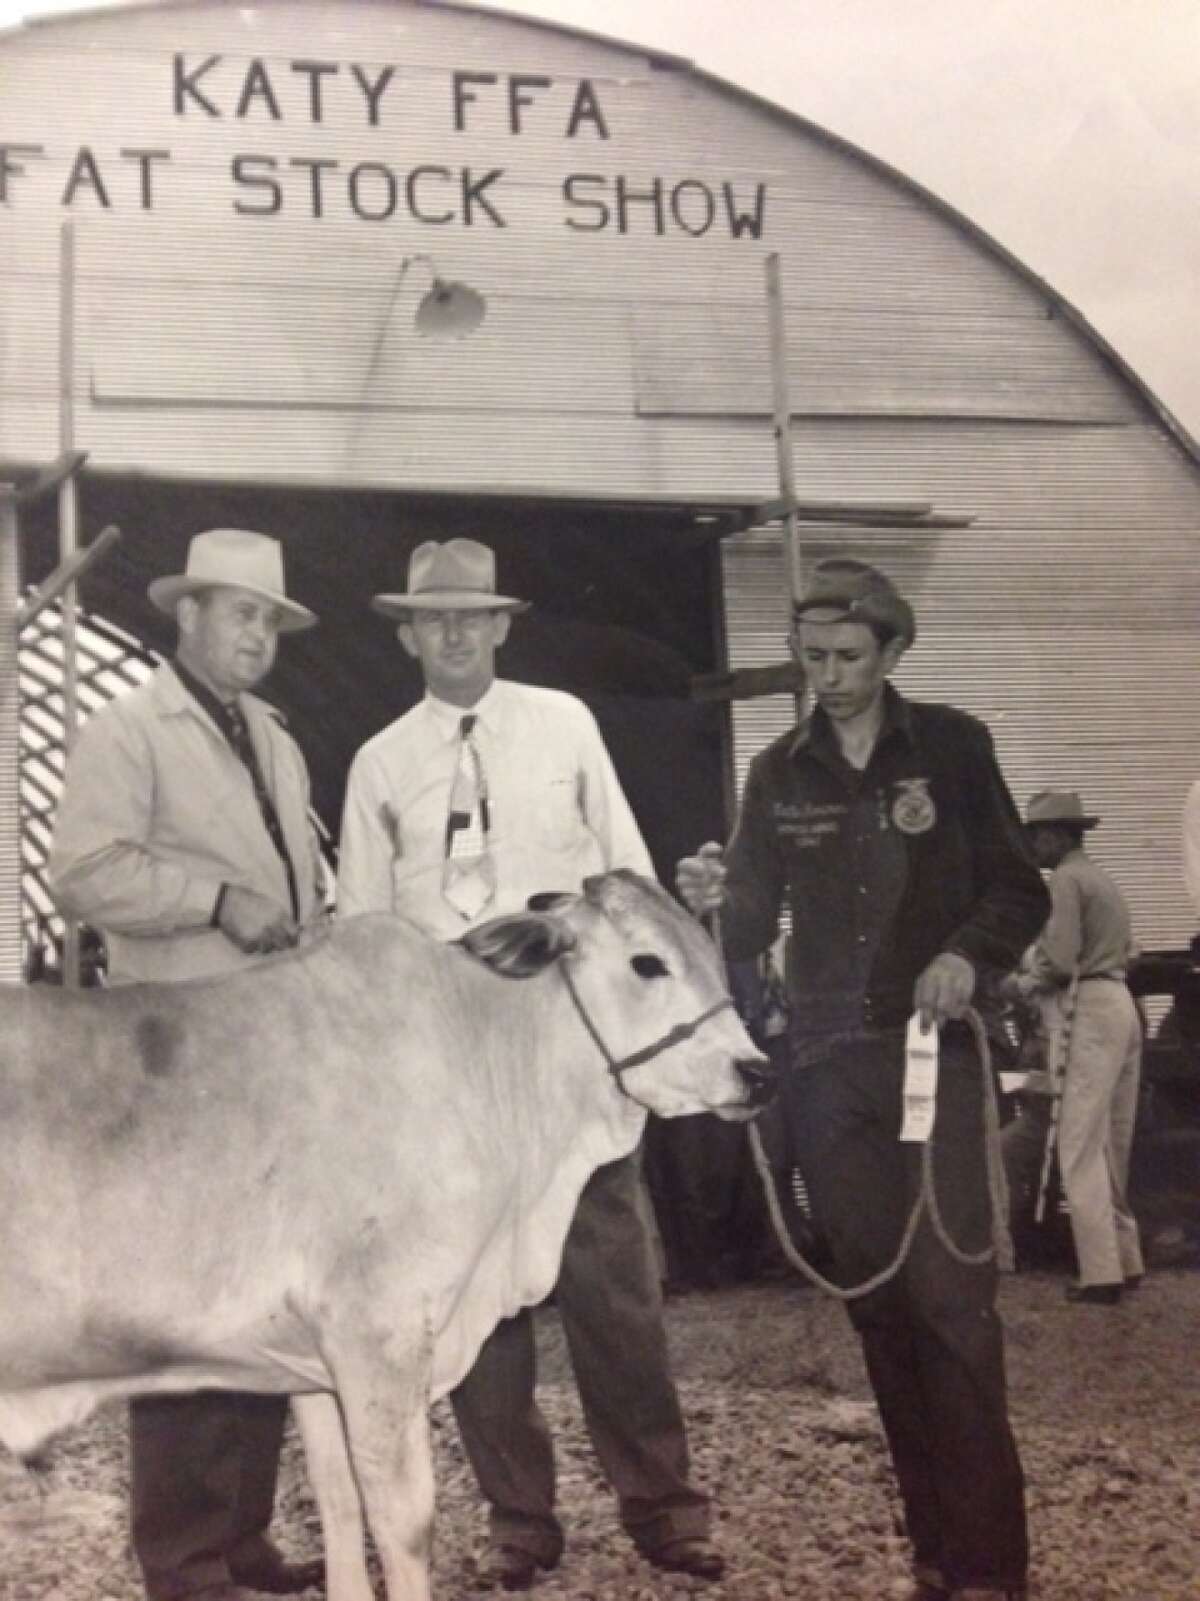 The Katy FFA program in the 1950s included activists such as George Nelson, center. Nelson is the father of Johnny Nelson, who served as the mayor of Katy from 1983-87.